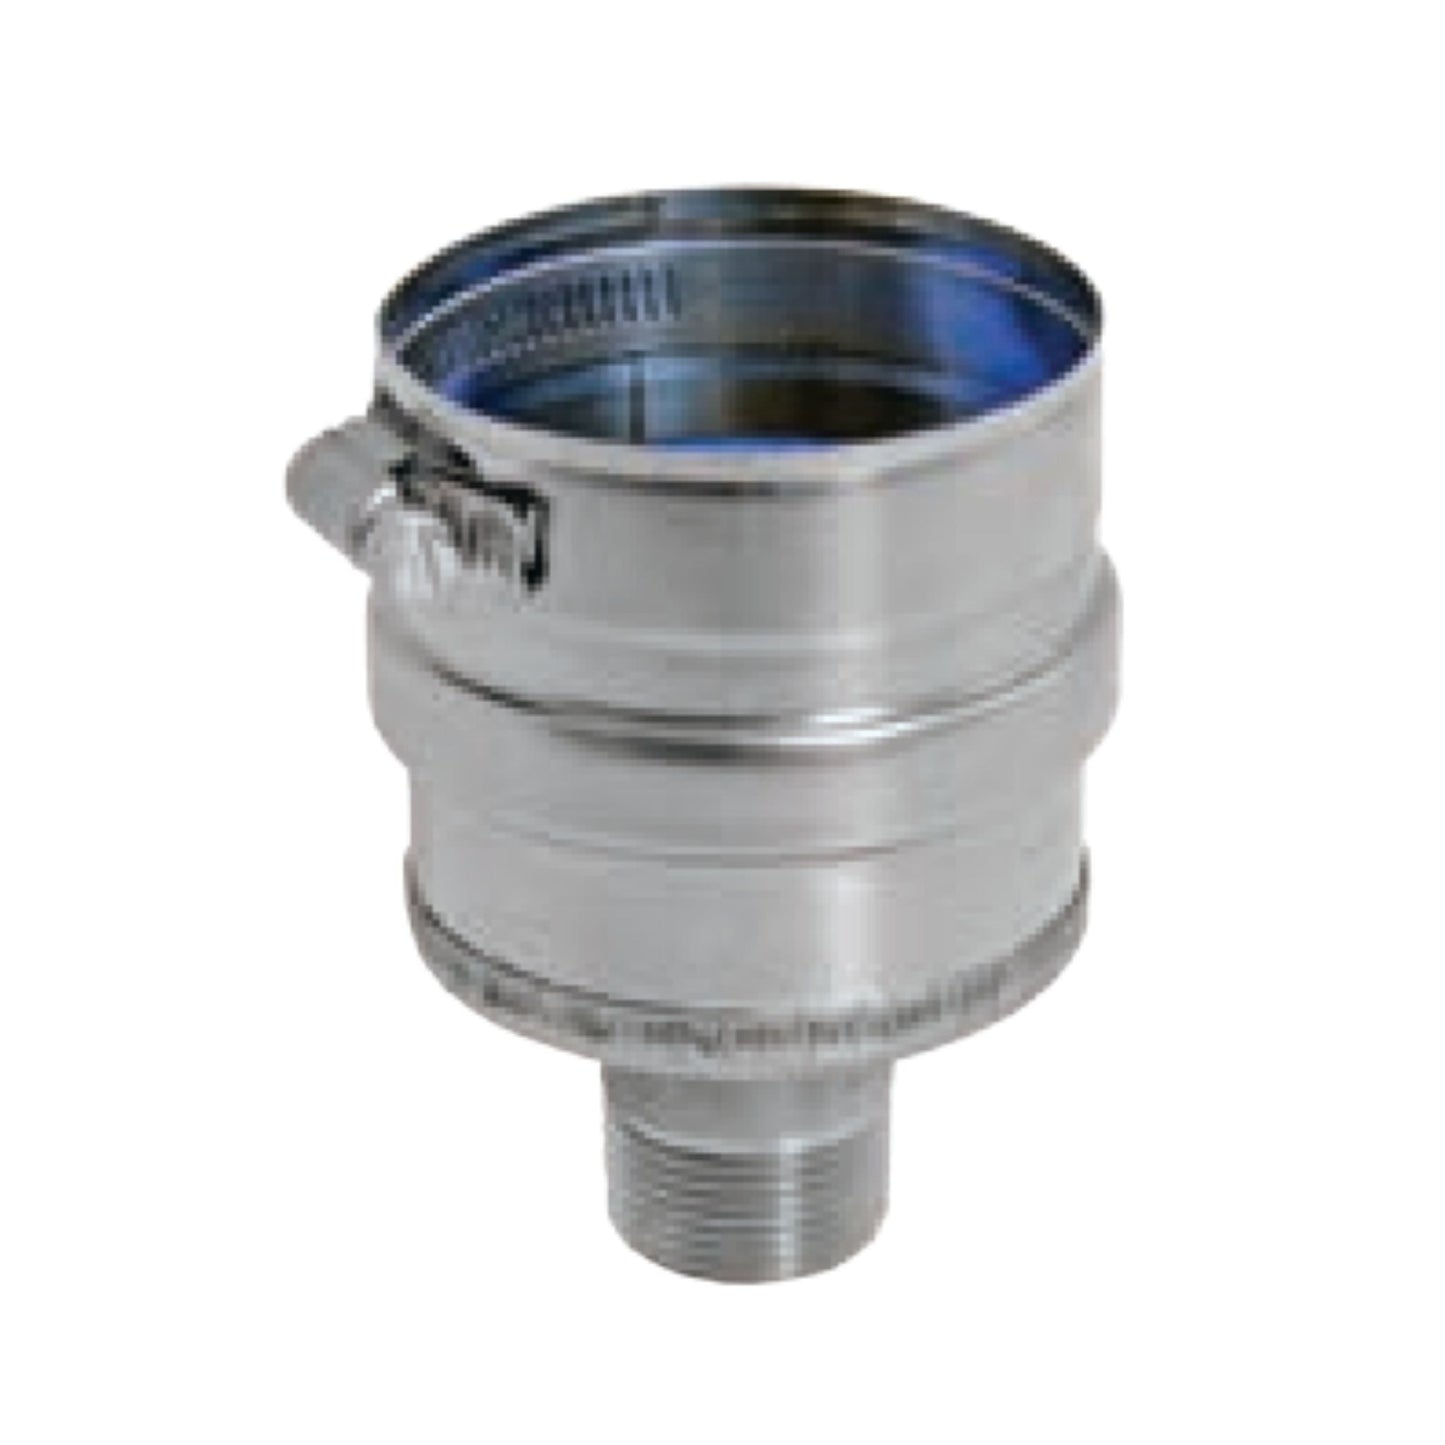 DuraVent FasNSeal 8" 316L Stainless Steel IPS Drain Fitting